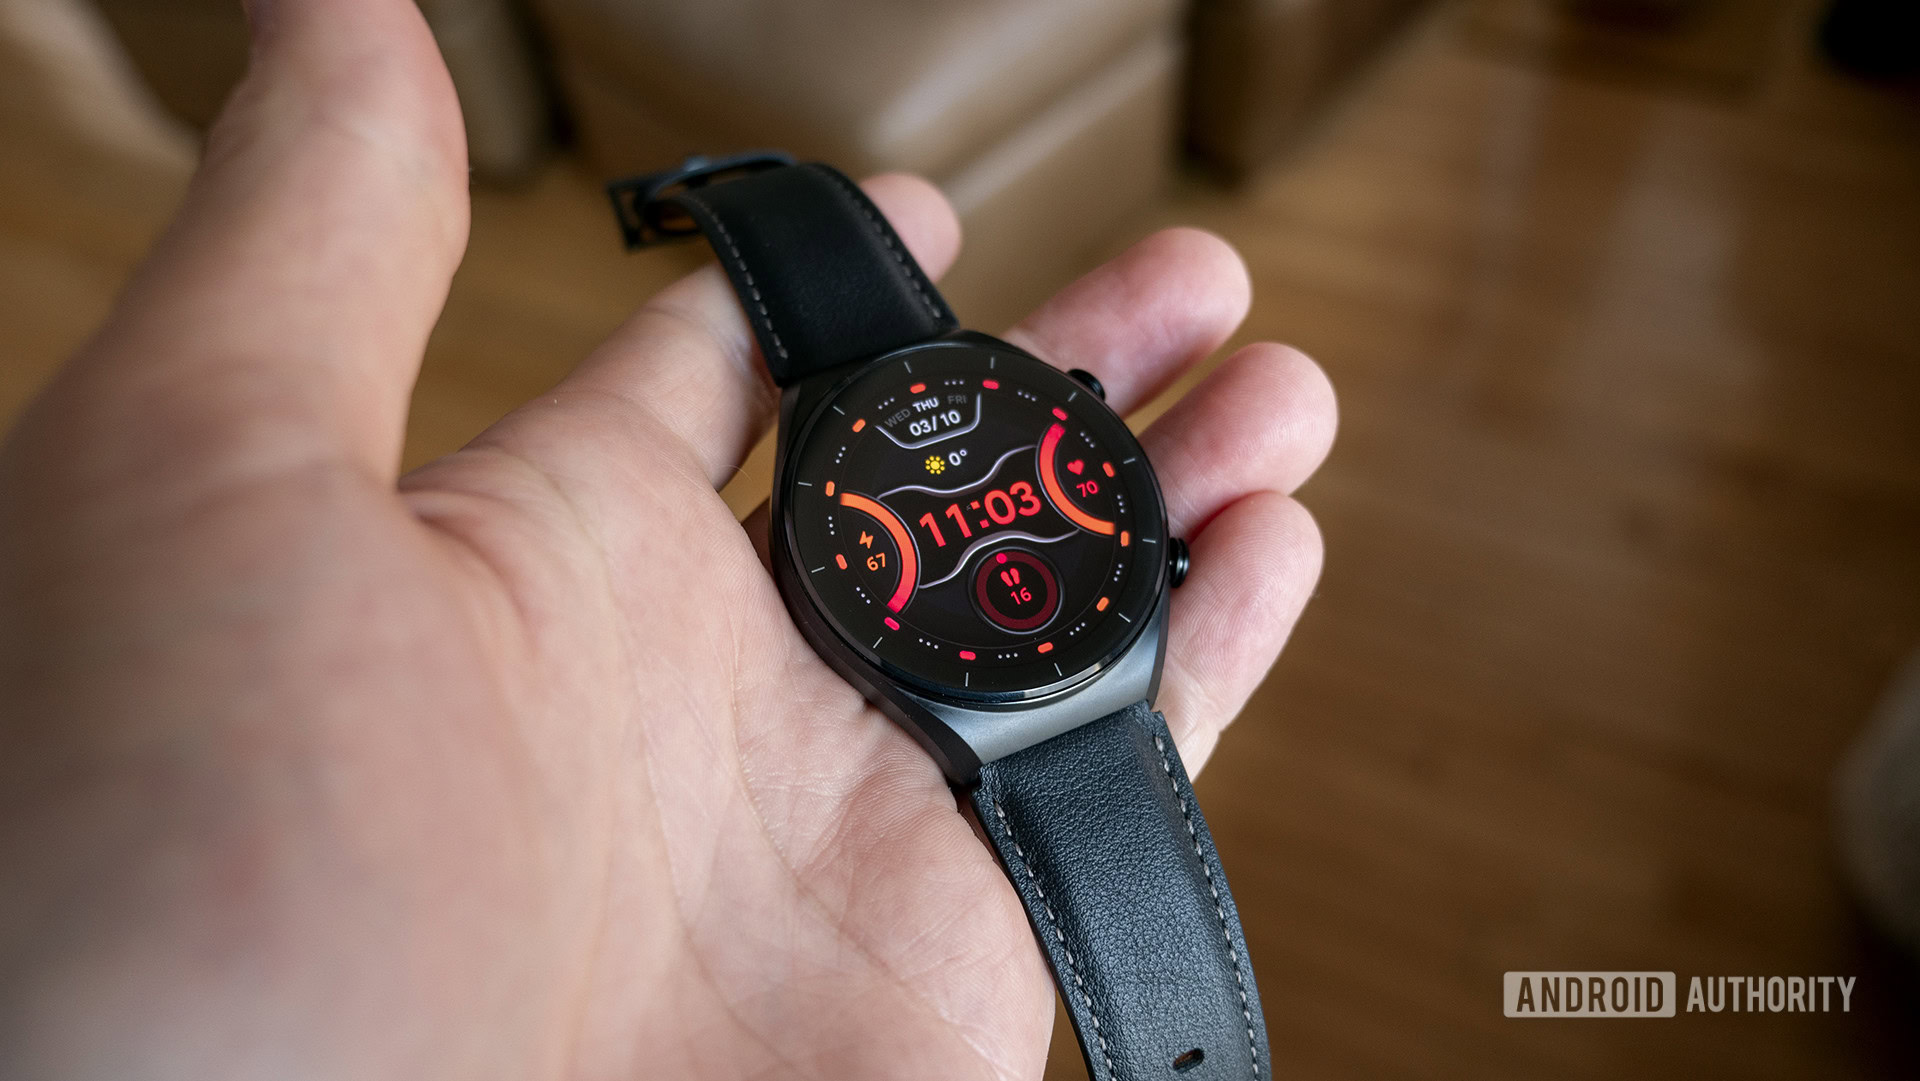 Xiaomi Watch S1 Active - Navigation, Control Panel, Watch Faces, and more!  